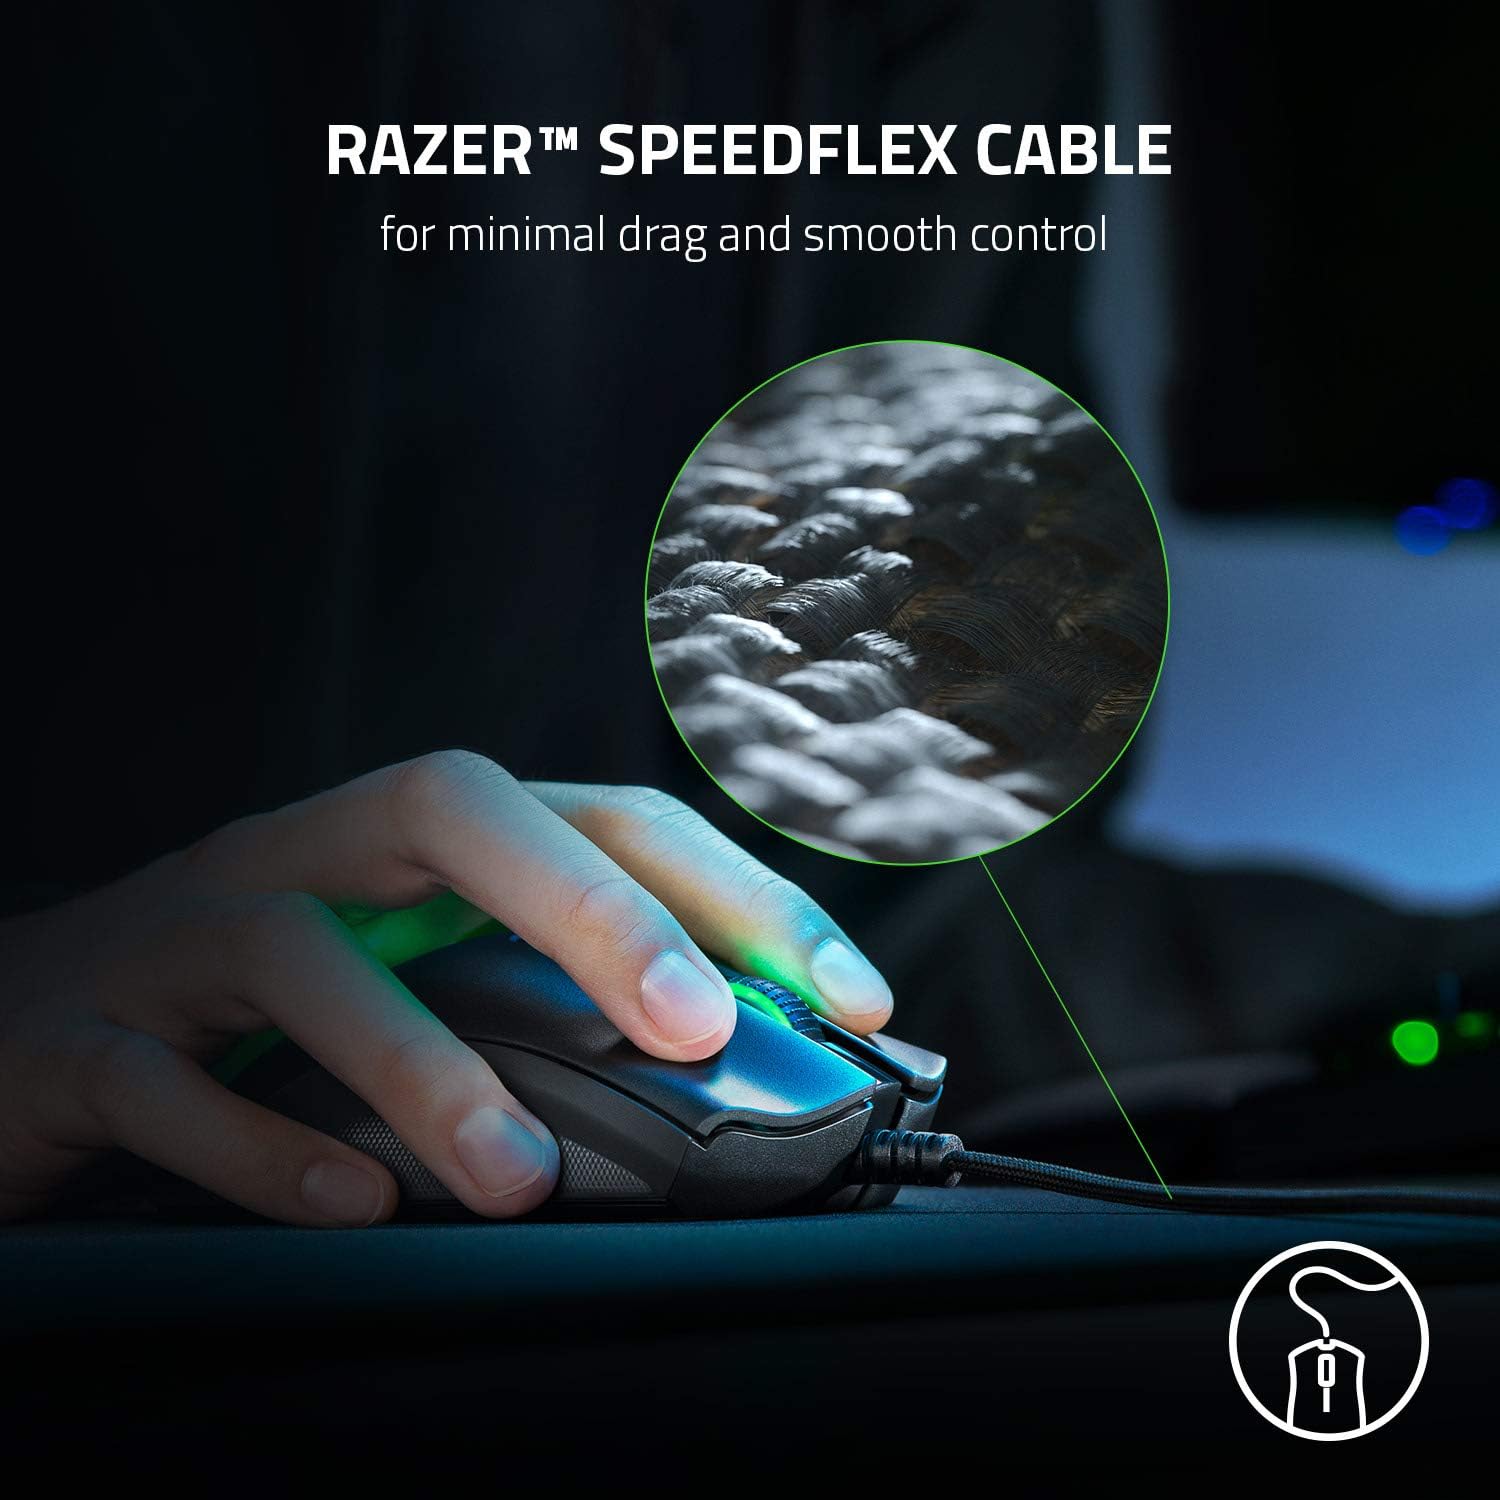 Razer DeathAdder V2 Wired Gaming Mouse 20K DPI Optical Sensor Switch, Chroma RGB Lighting, 8 Programmable Buttons, Rubberized Side Grips - Black